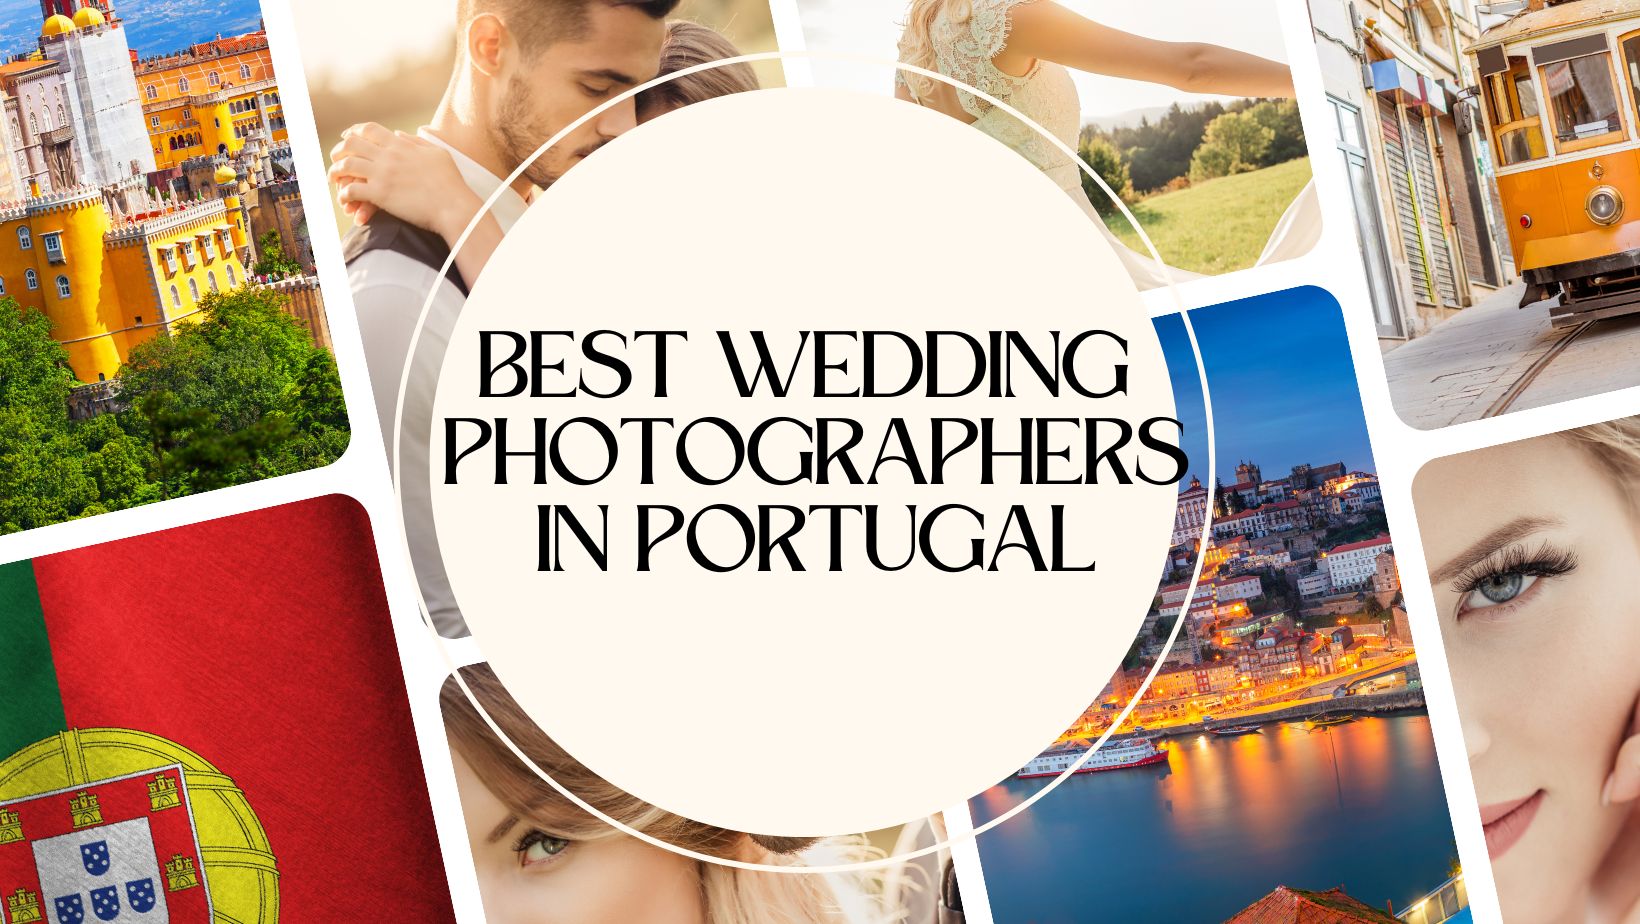 Best Wedding Photographers in Portugal